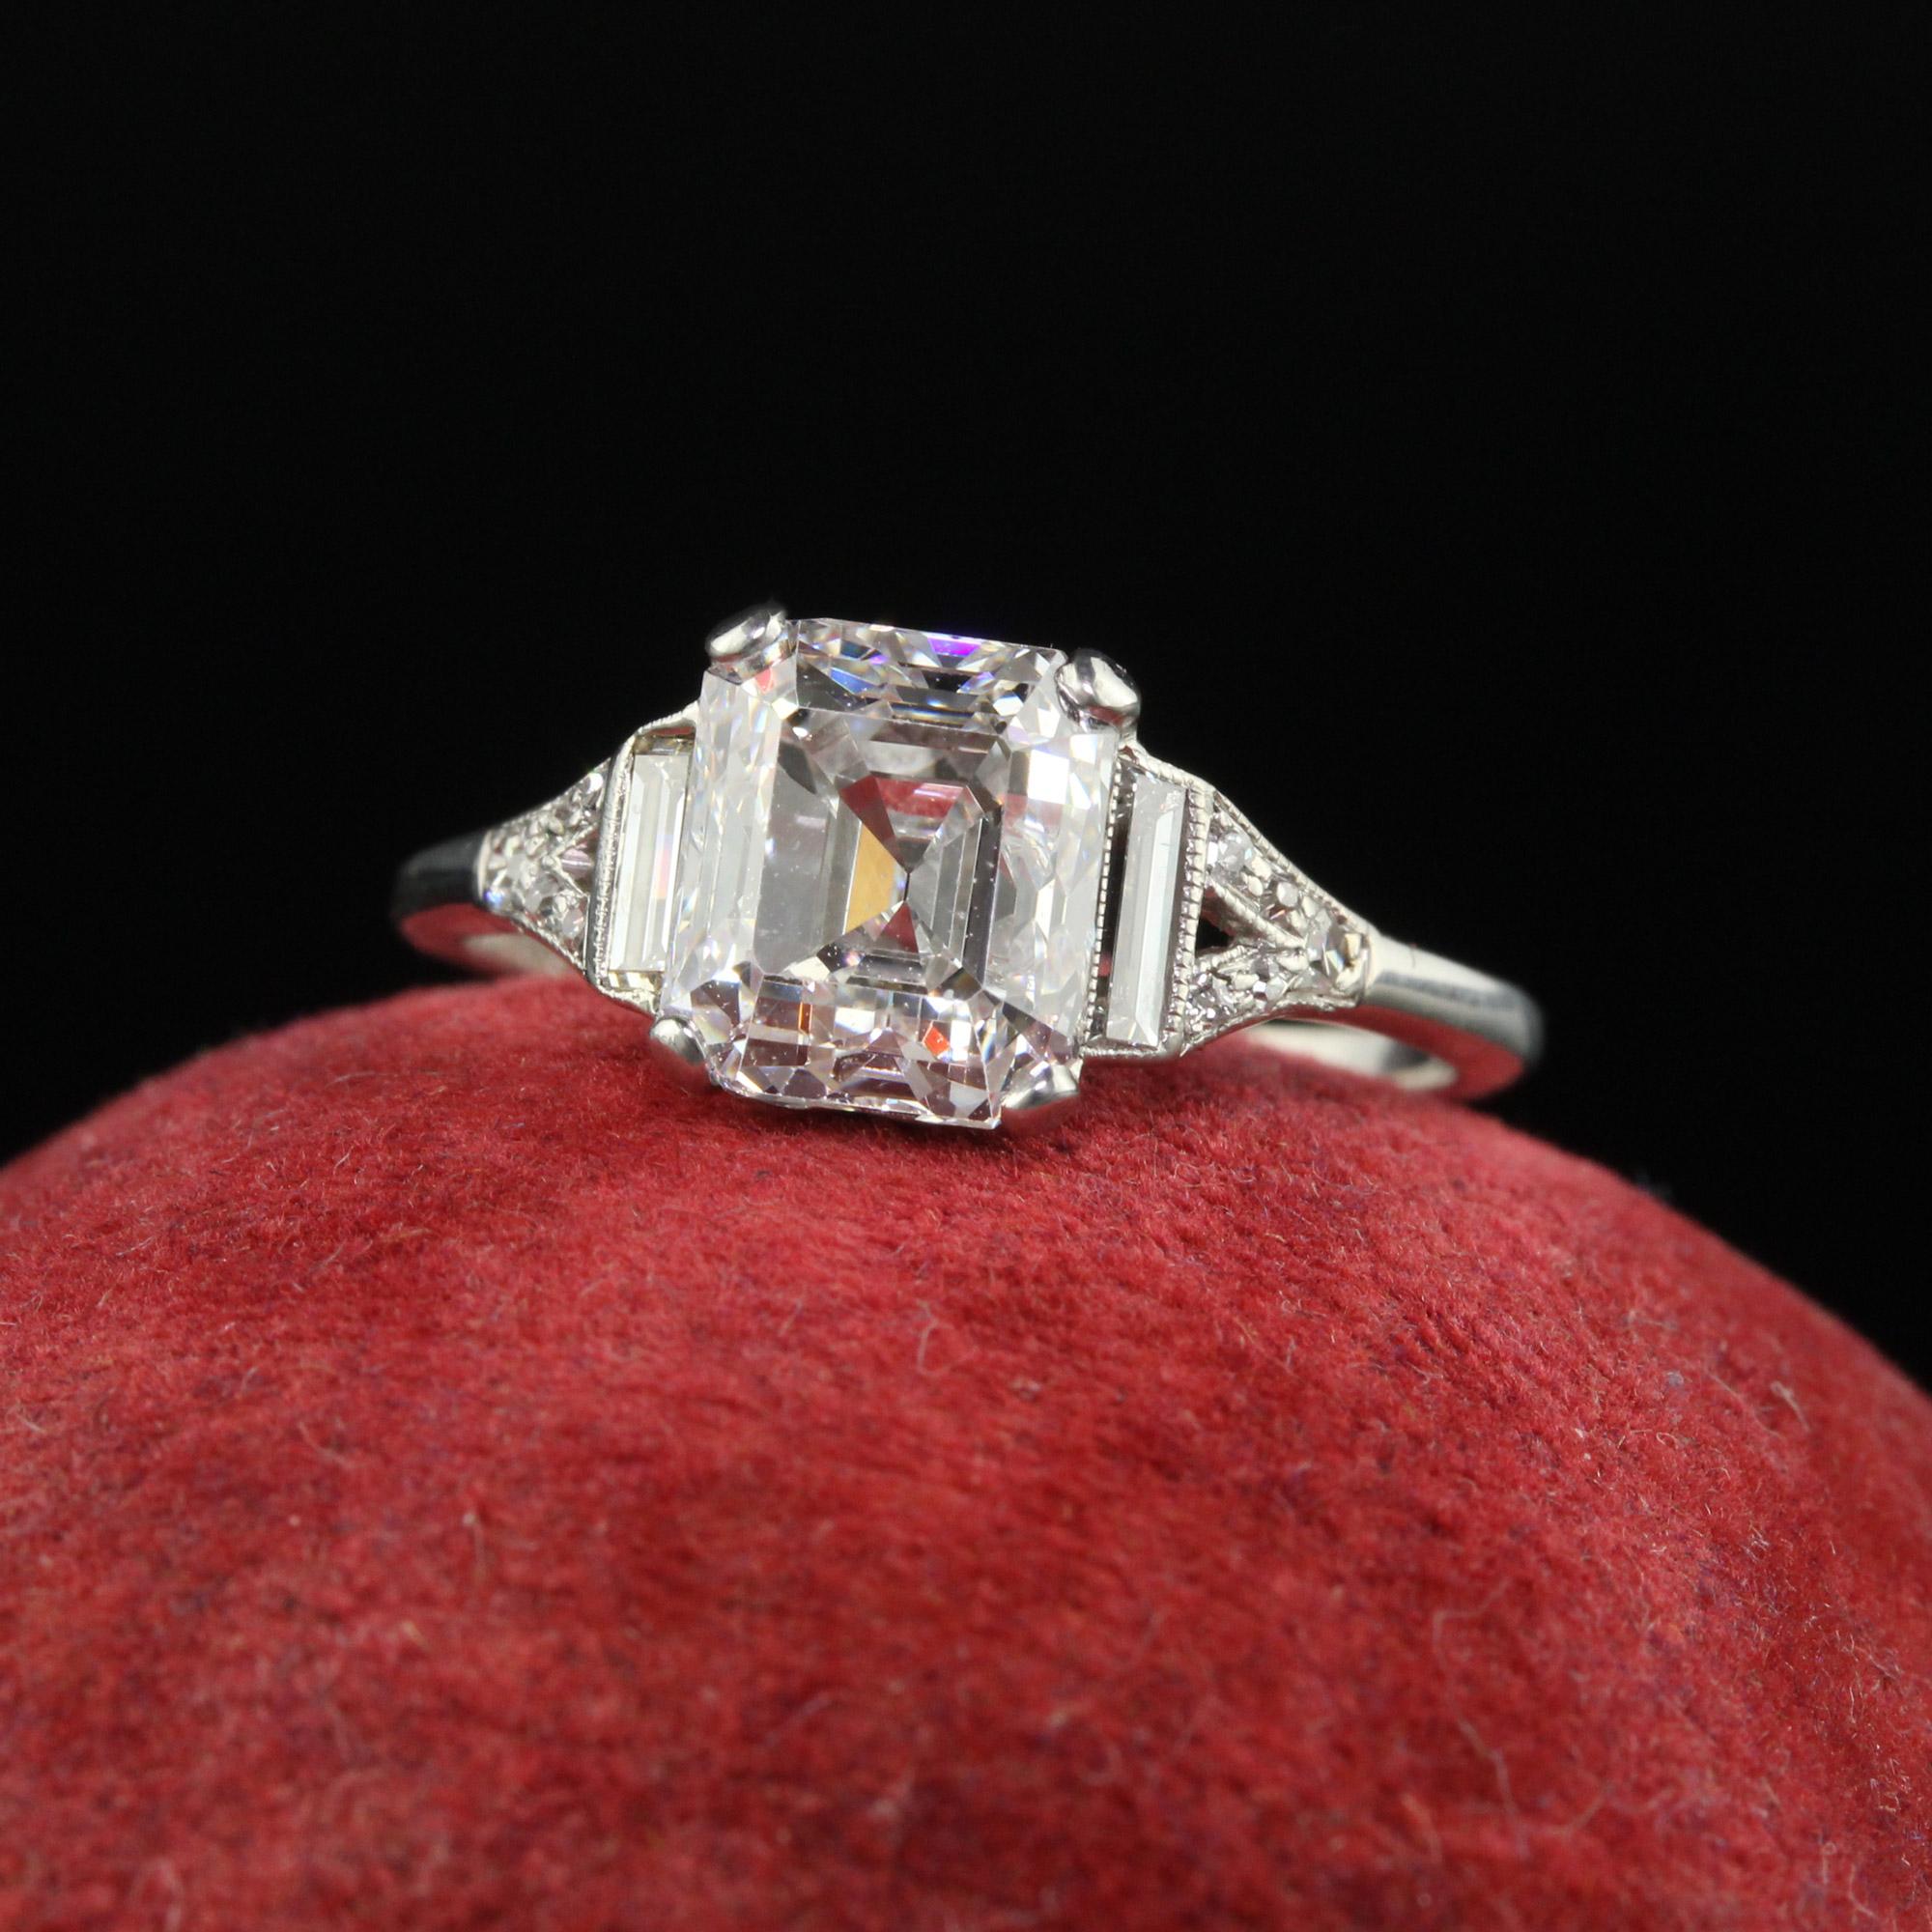 Beautiful Antique Art Deco Platinum Old Emerald Cut Diamond Baguette Engagement Ring - GIA. This gorgeous engagement ring is crafted in platinum. The center holds an exceptional emerald cut diamond that has a GIA report. The diamond is set in a